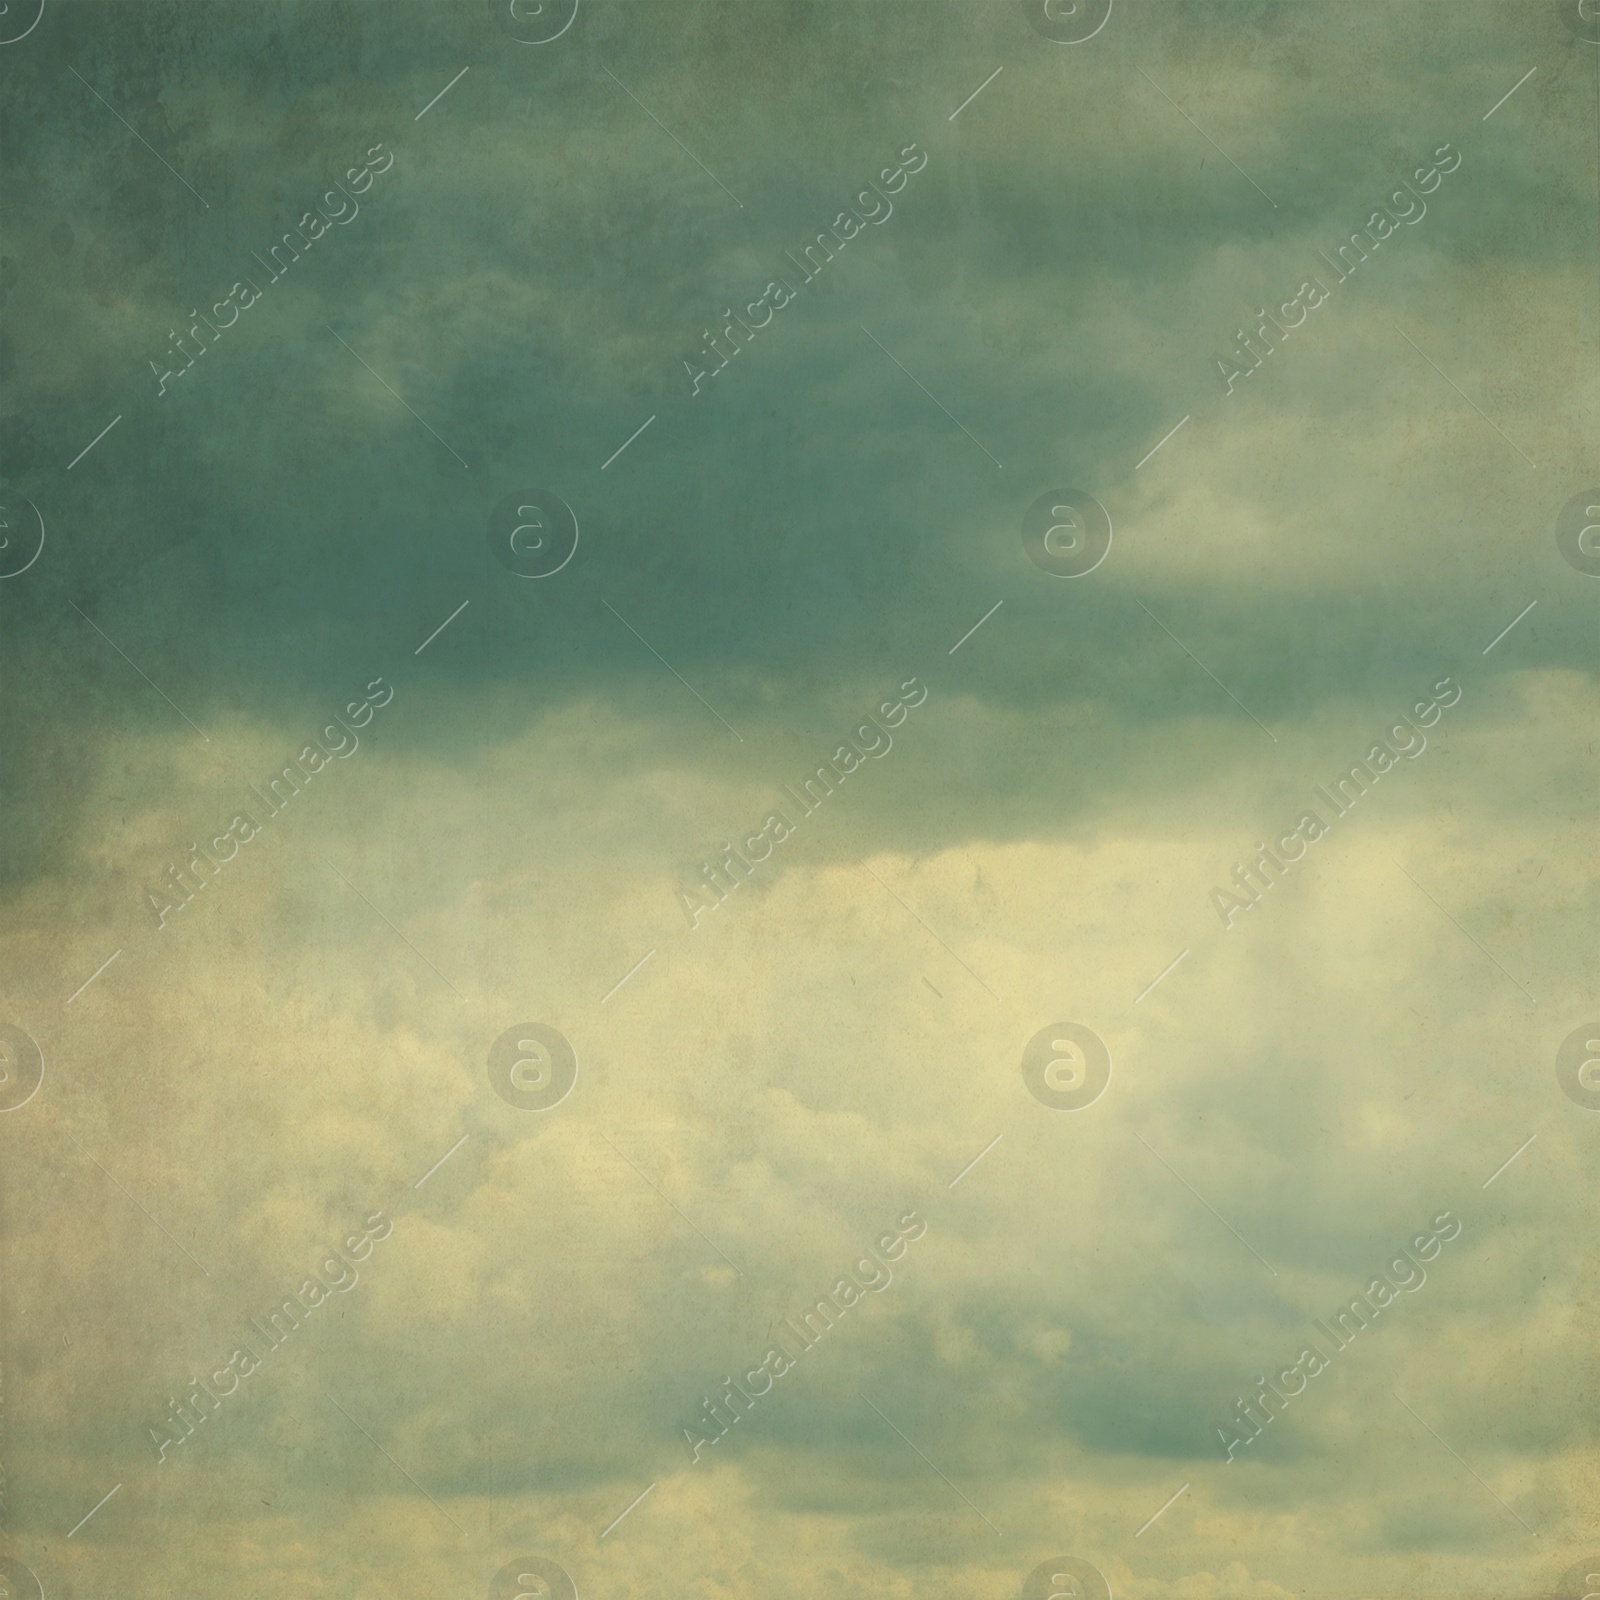 Image of View of beautiful sky with clouds. Retro style filter 